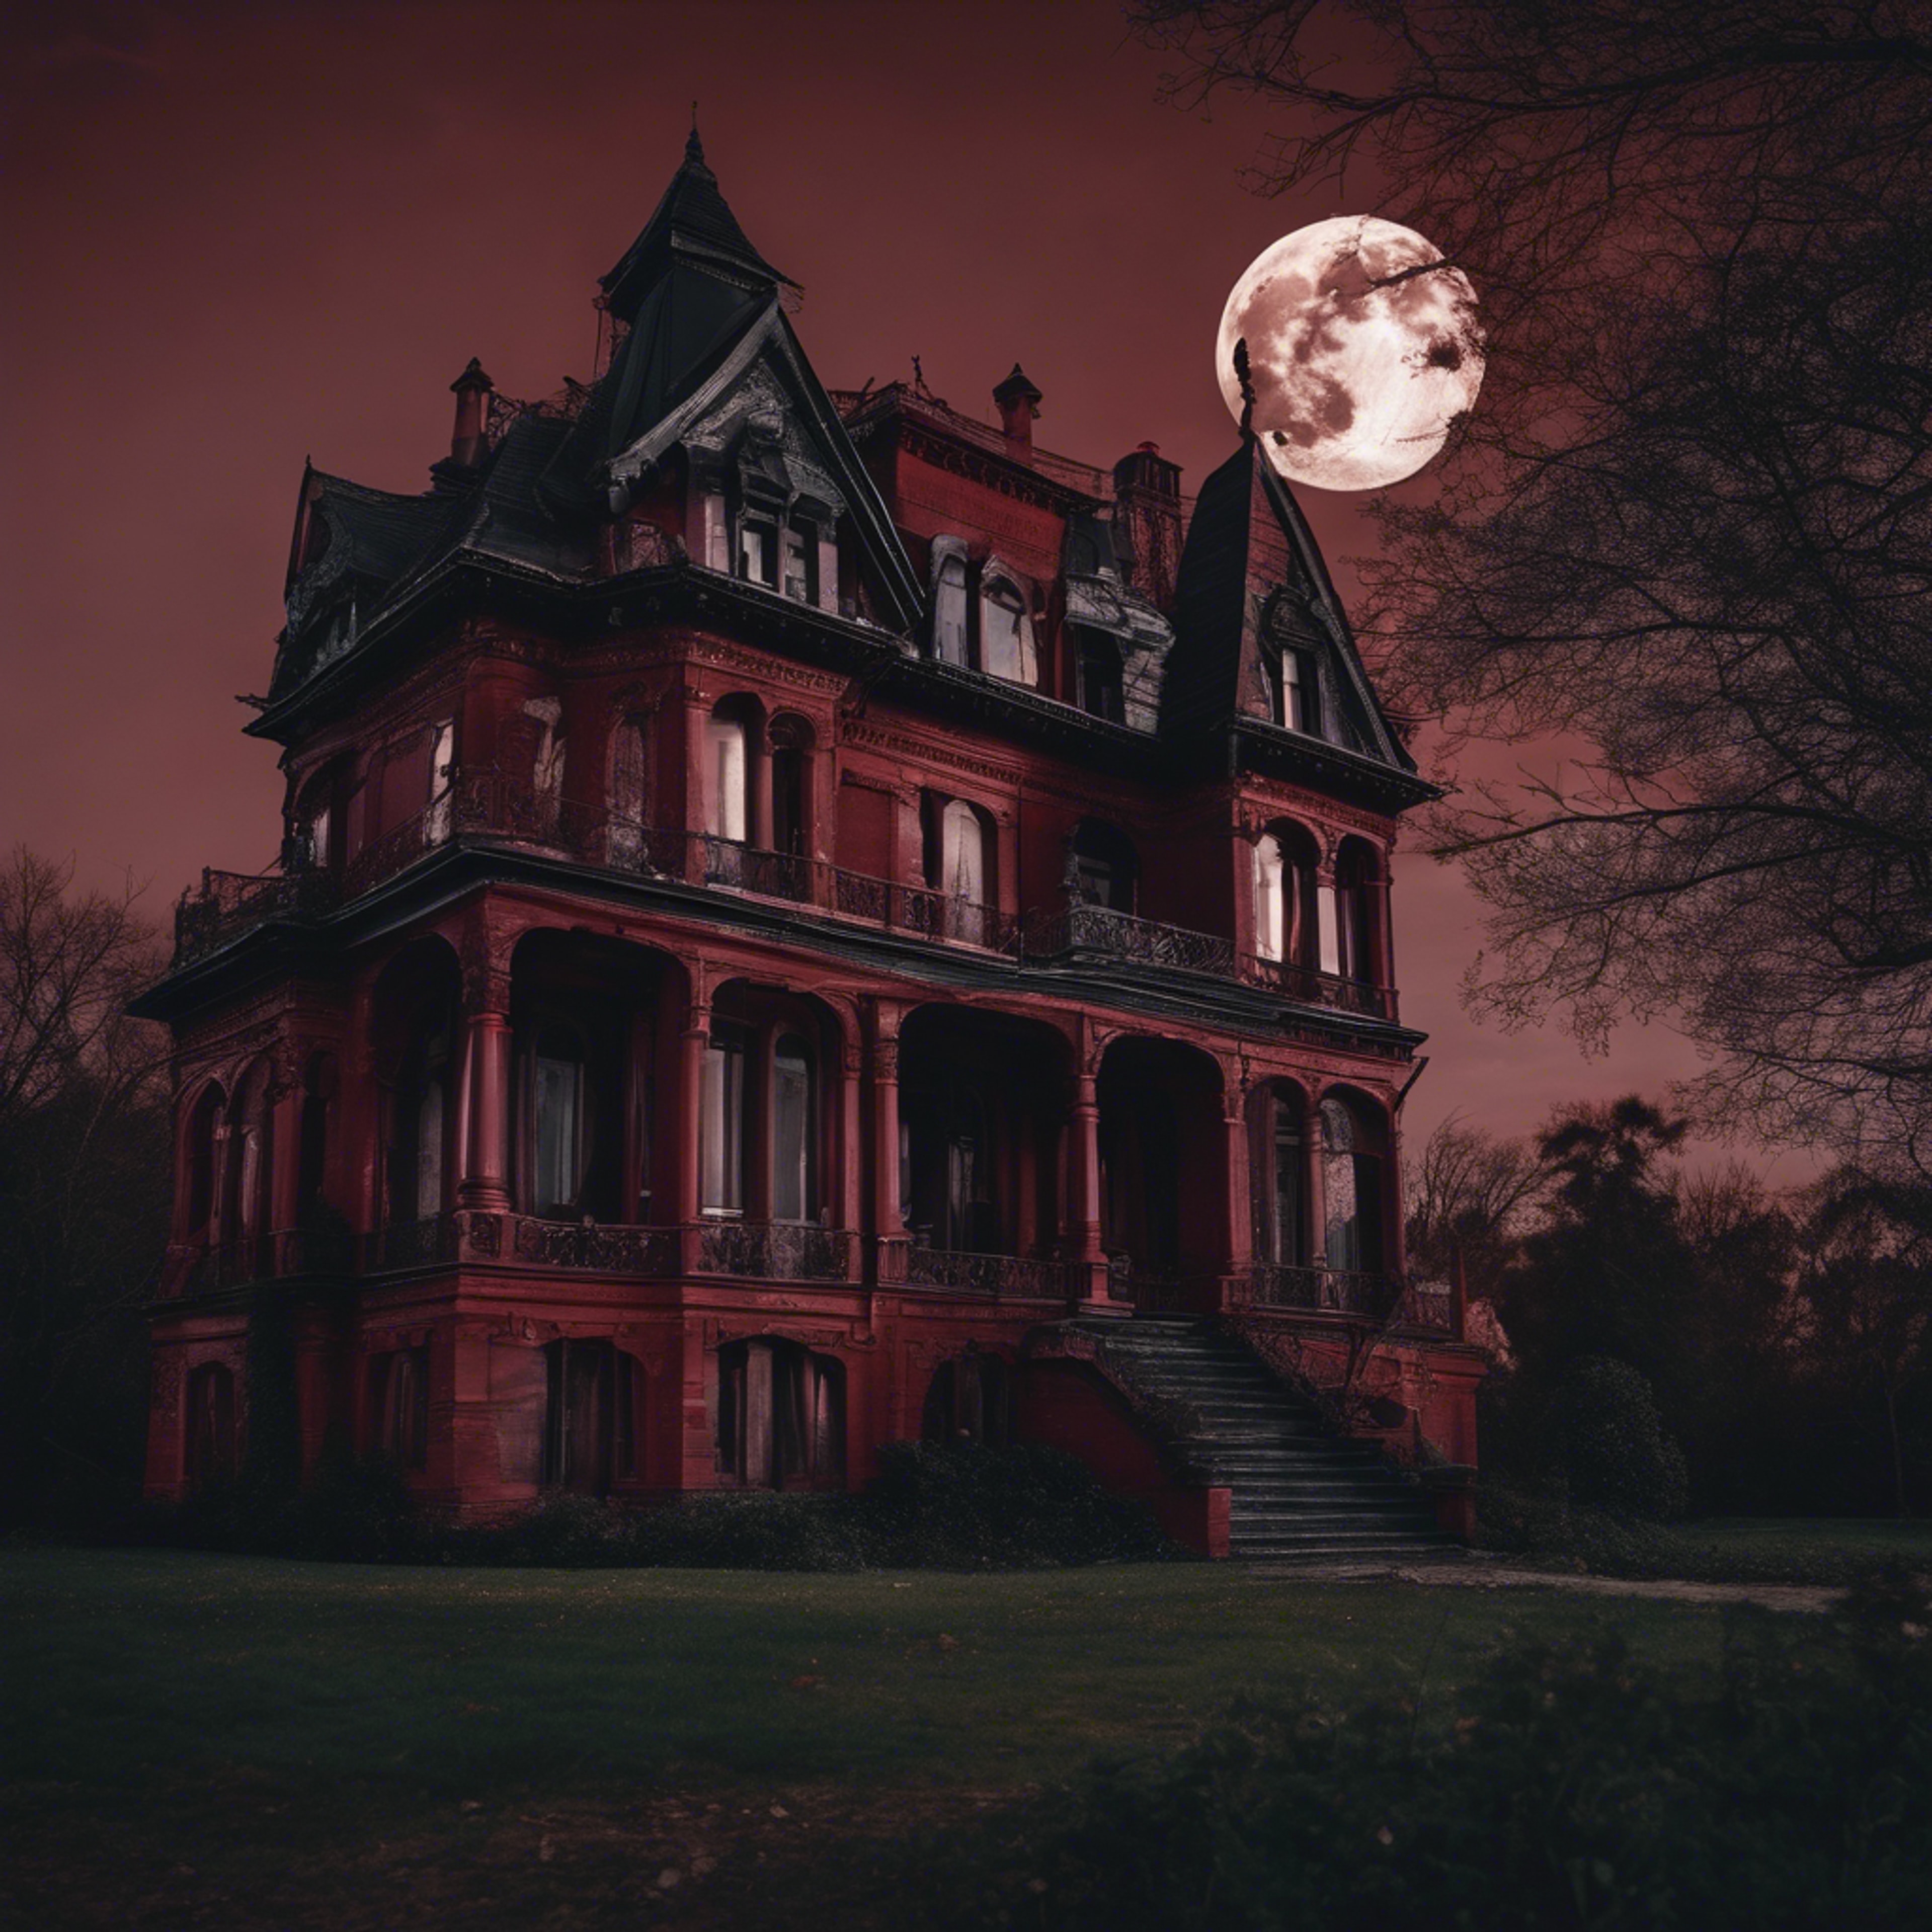 Moody view of an old Victorian mansion in dark red hues under a nearly full moon. Wallpaper[8b4d1d2d66a3409f8c39]